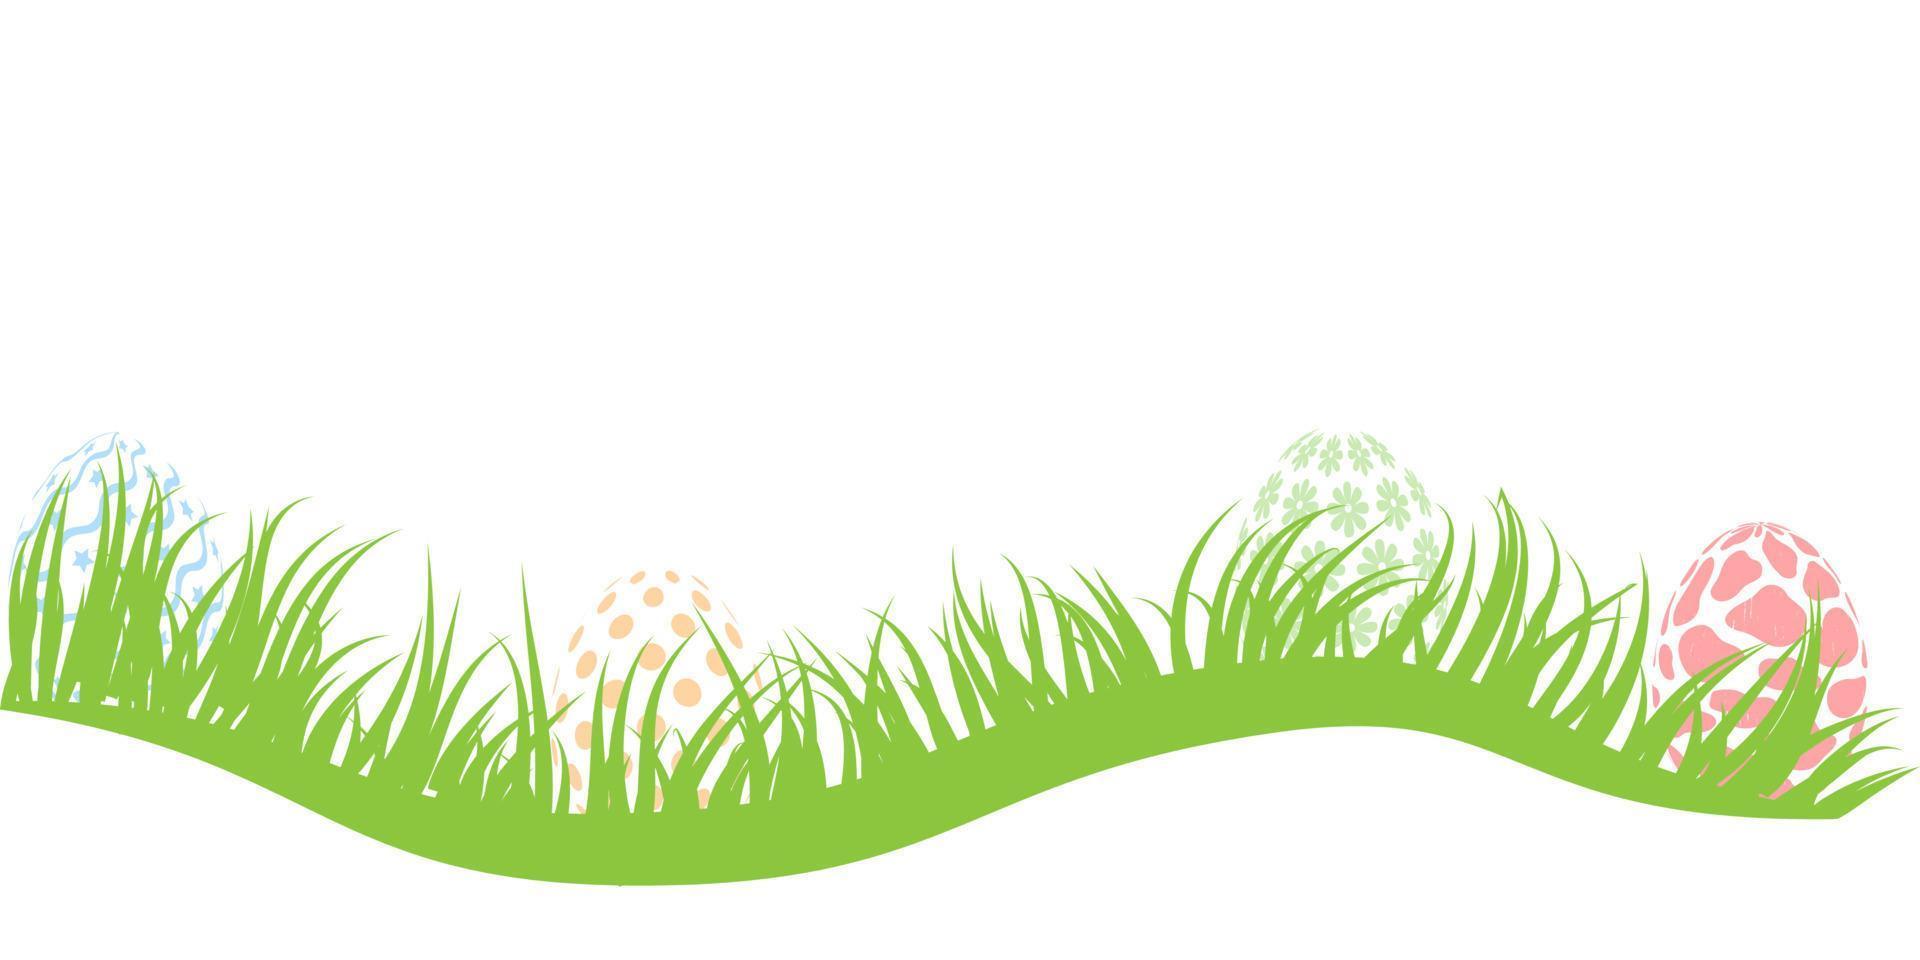 Easter eggs in grass. vector